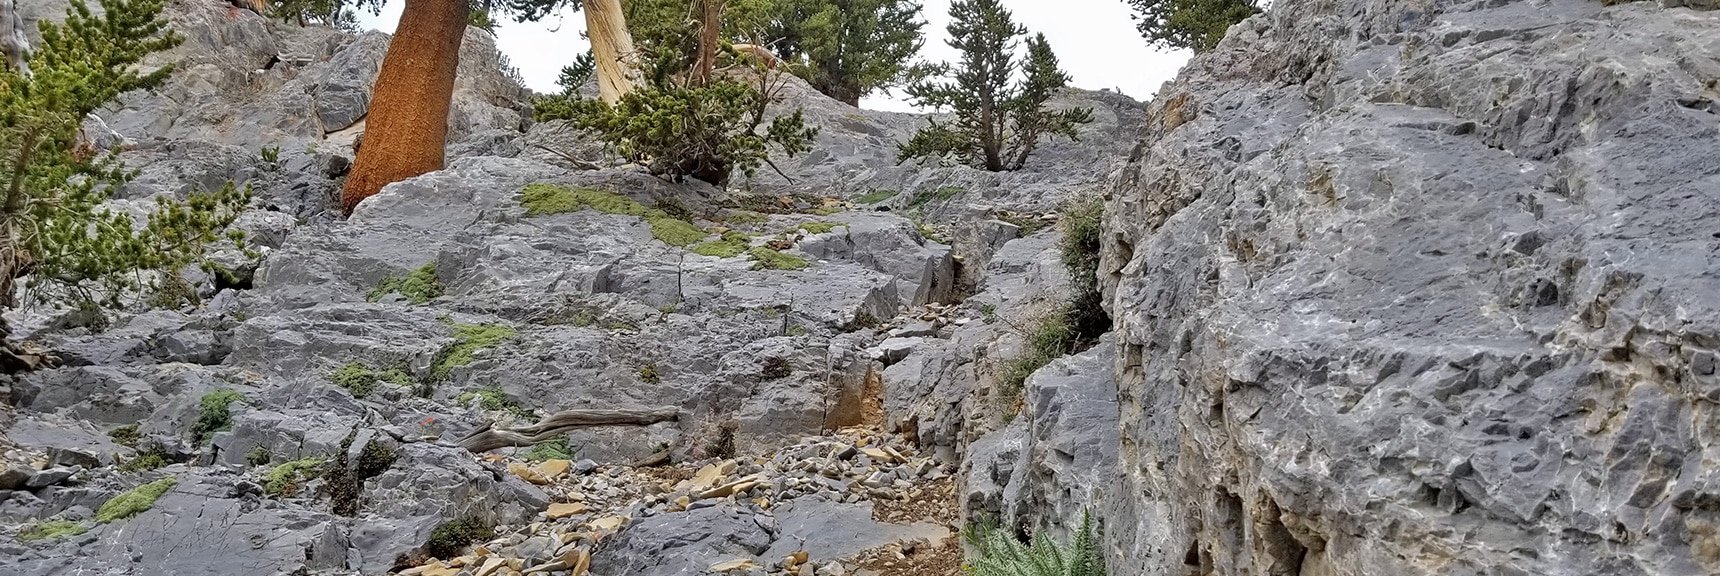 View Back Up the NE Chute from the 2nd Ledge | Mummy Mountain NE Cliffs Descent | Mt Charleston Wilderness | Spring Mountains, Nevada